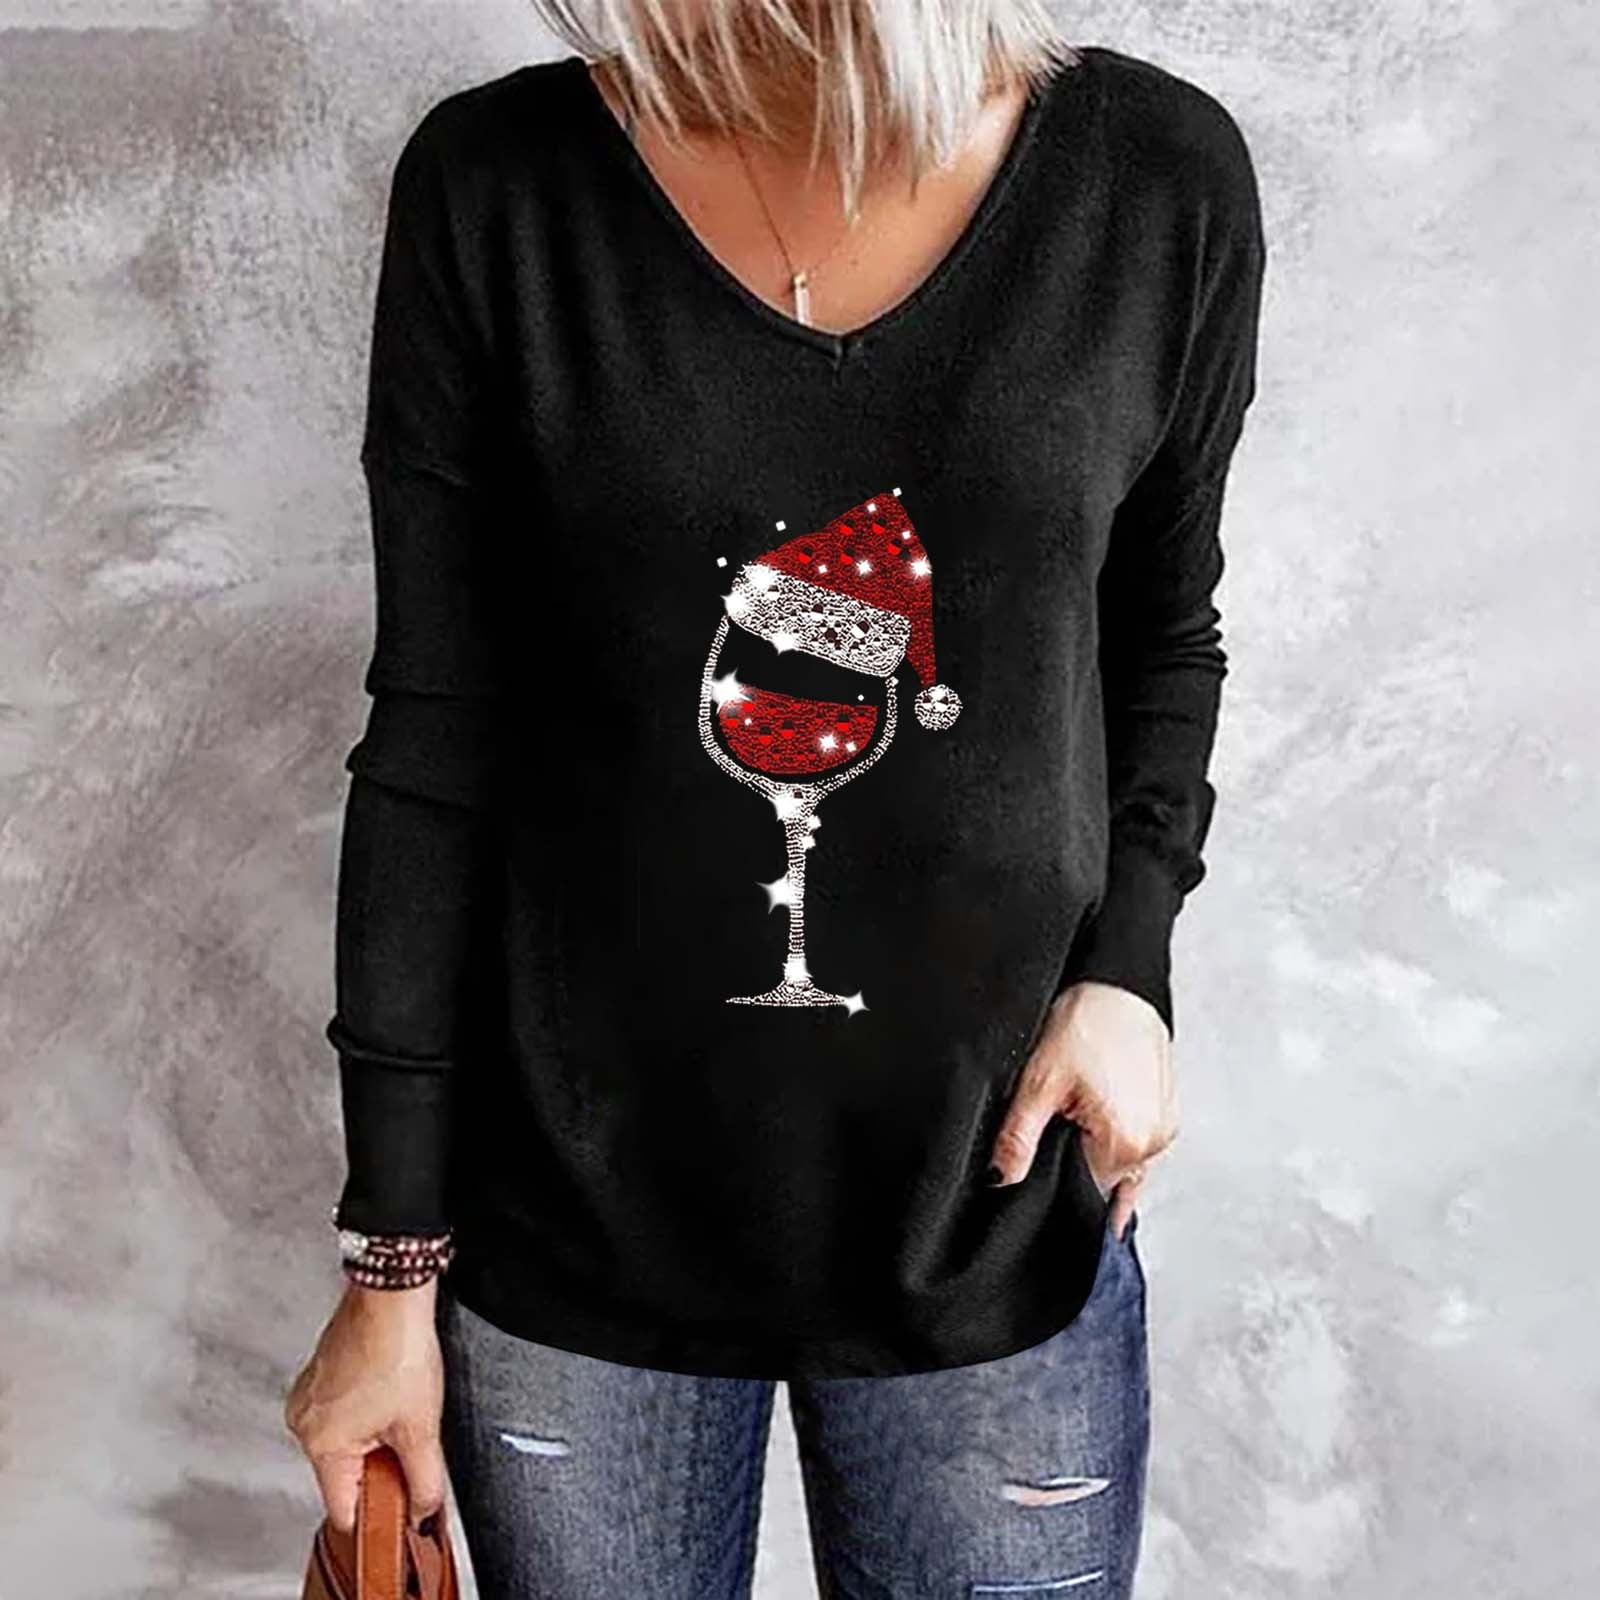 BVnarty Women's Casual Round Neck T-Shirt Raglan Color Matching Christmas Wine Glasses Santa Hats and Snow Printed Long Sleeve Tops Gray XL